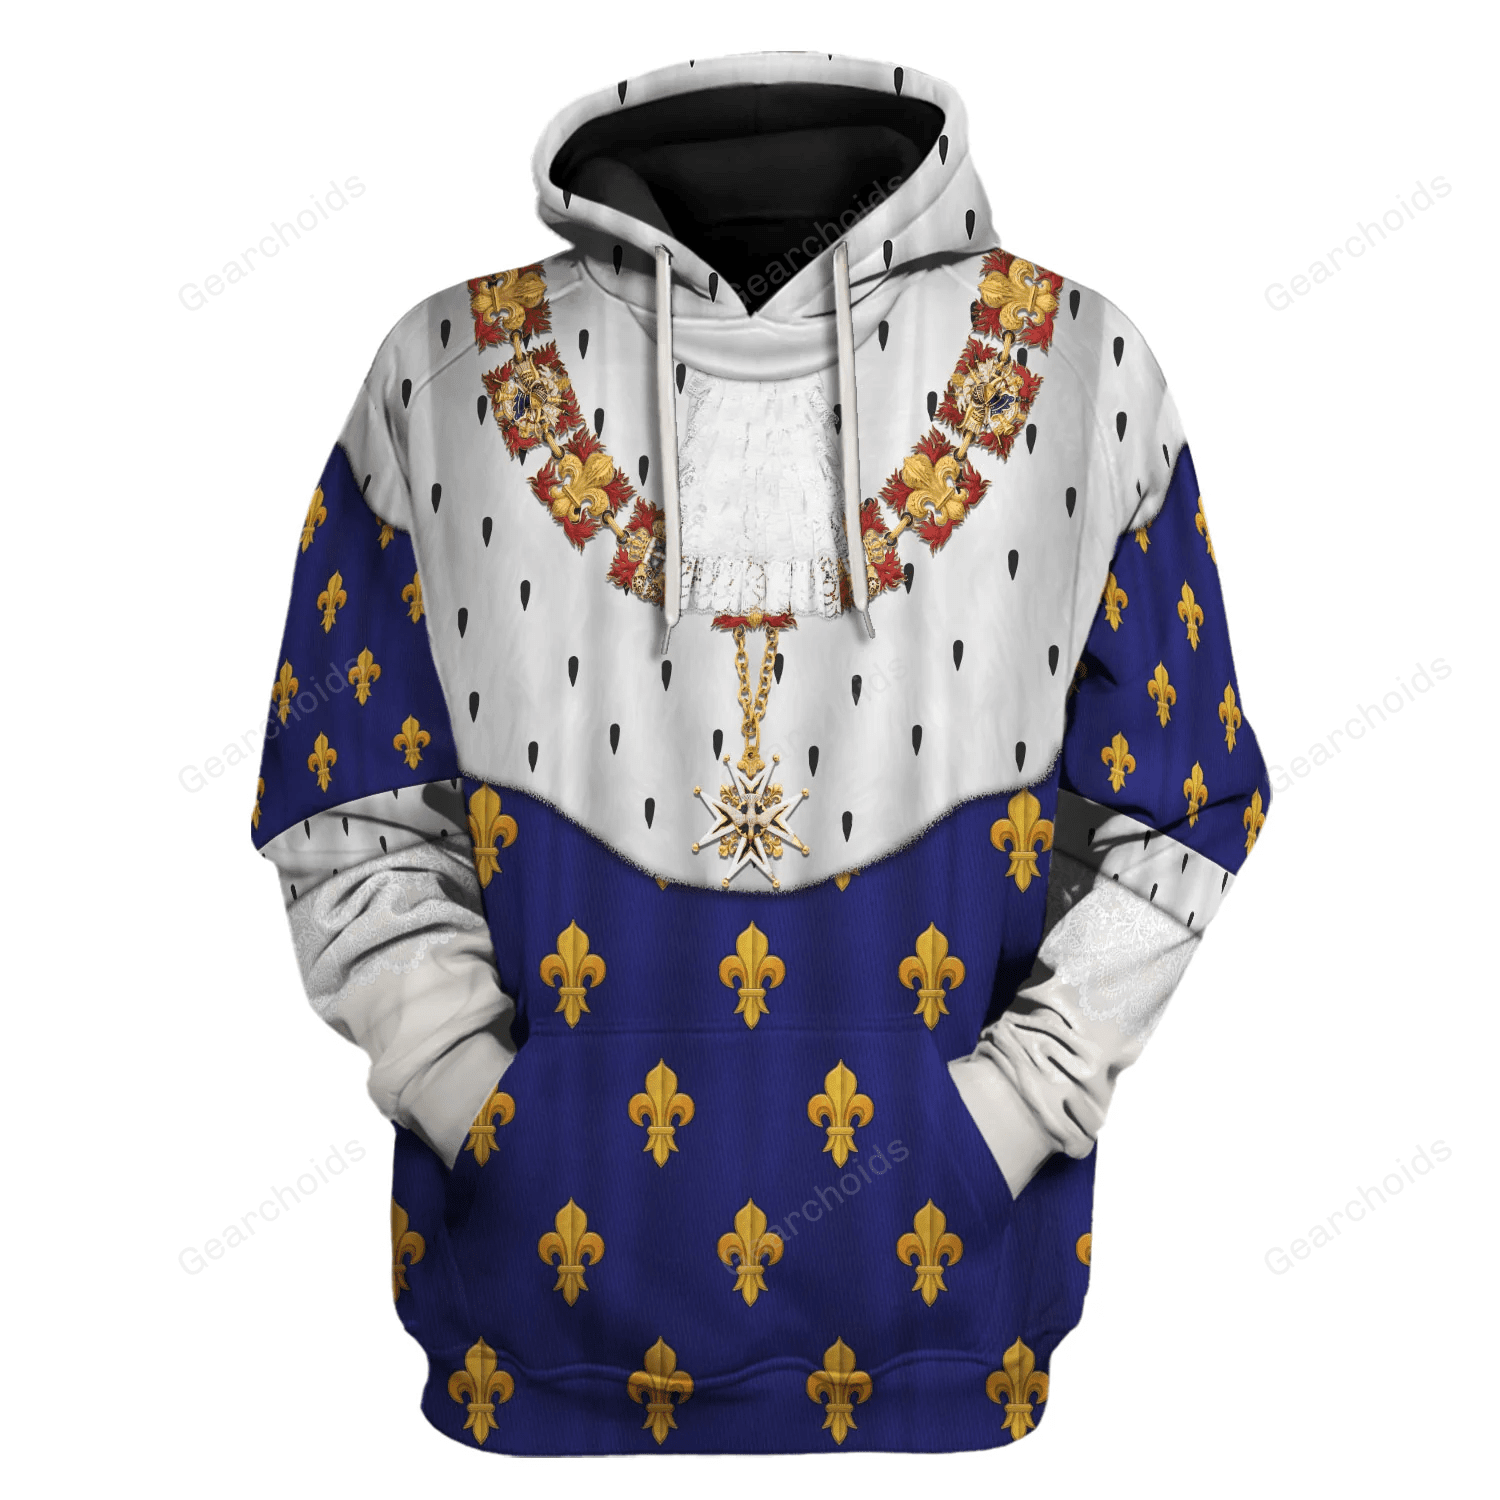 Gearchoids Charles X of France in Coronation Robes Blue Costume All Over Print Hoodie Sweatshirt T-Shirt Tracksuit